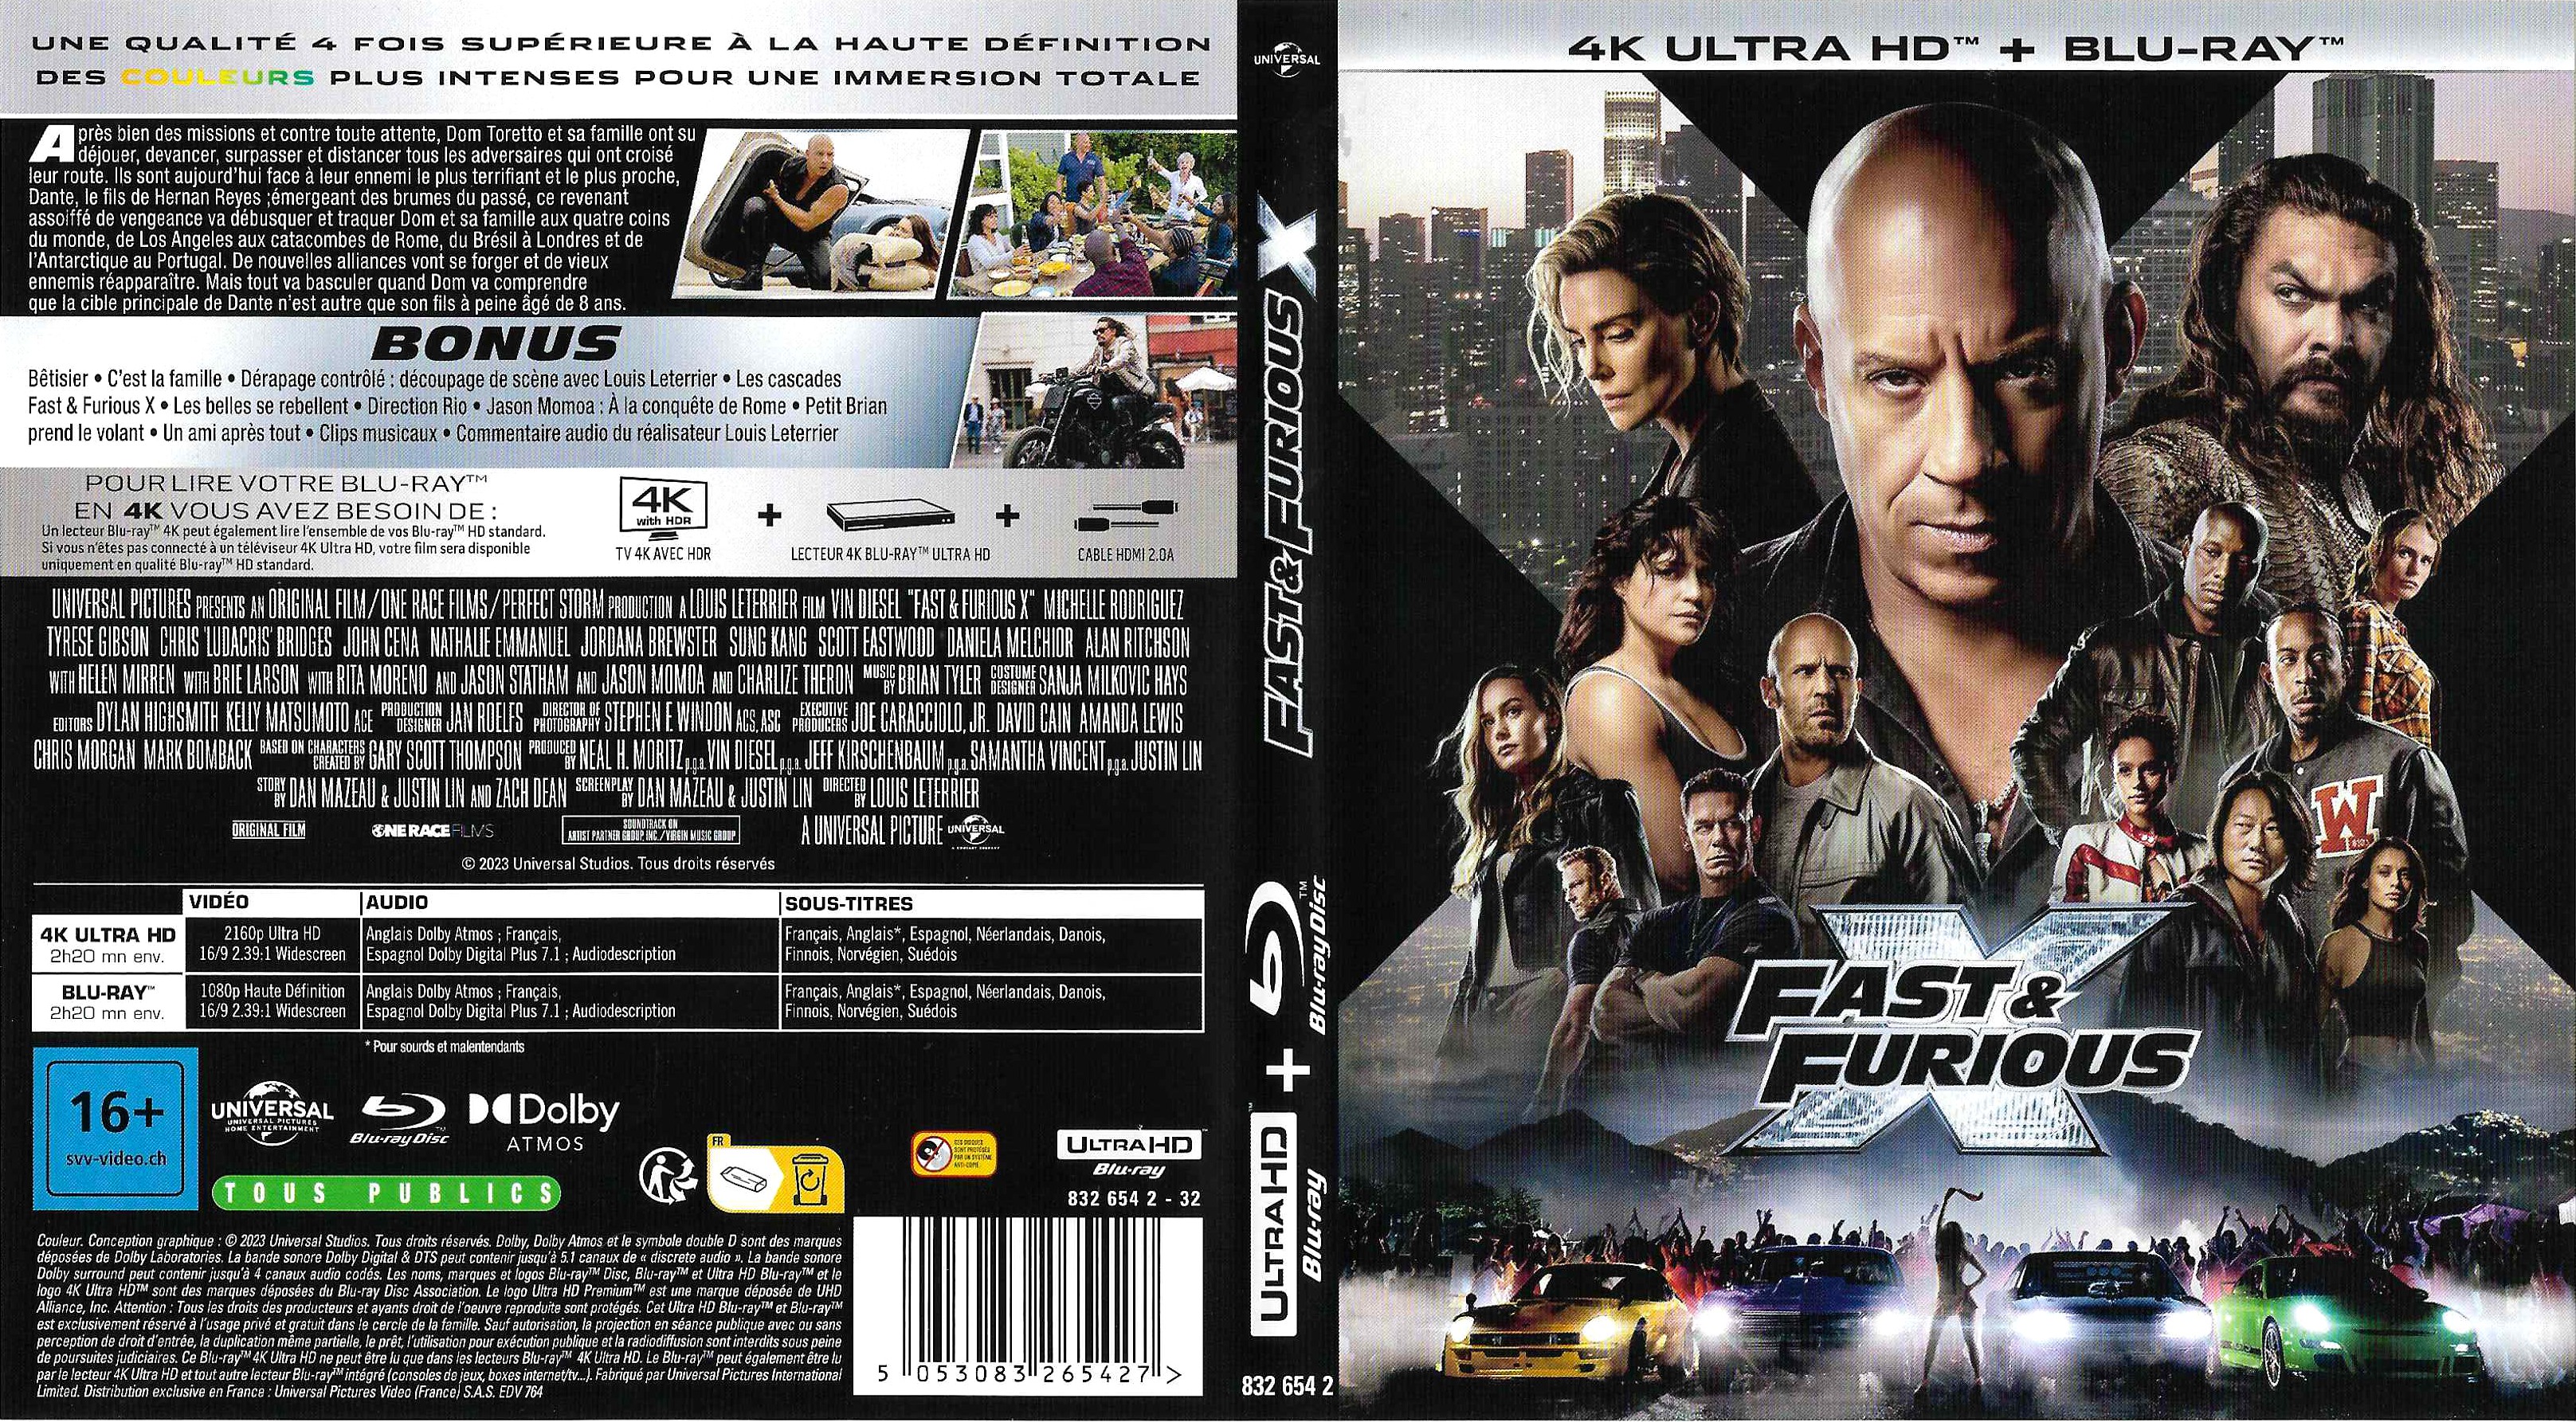 Jaquette DVD Fast And Furious X 4K (BLU-RAY)